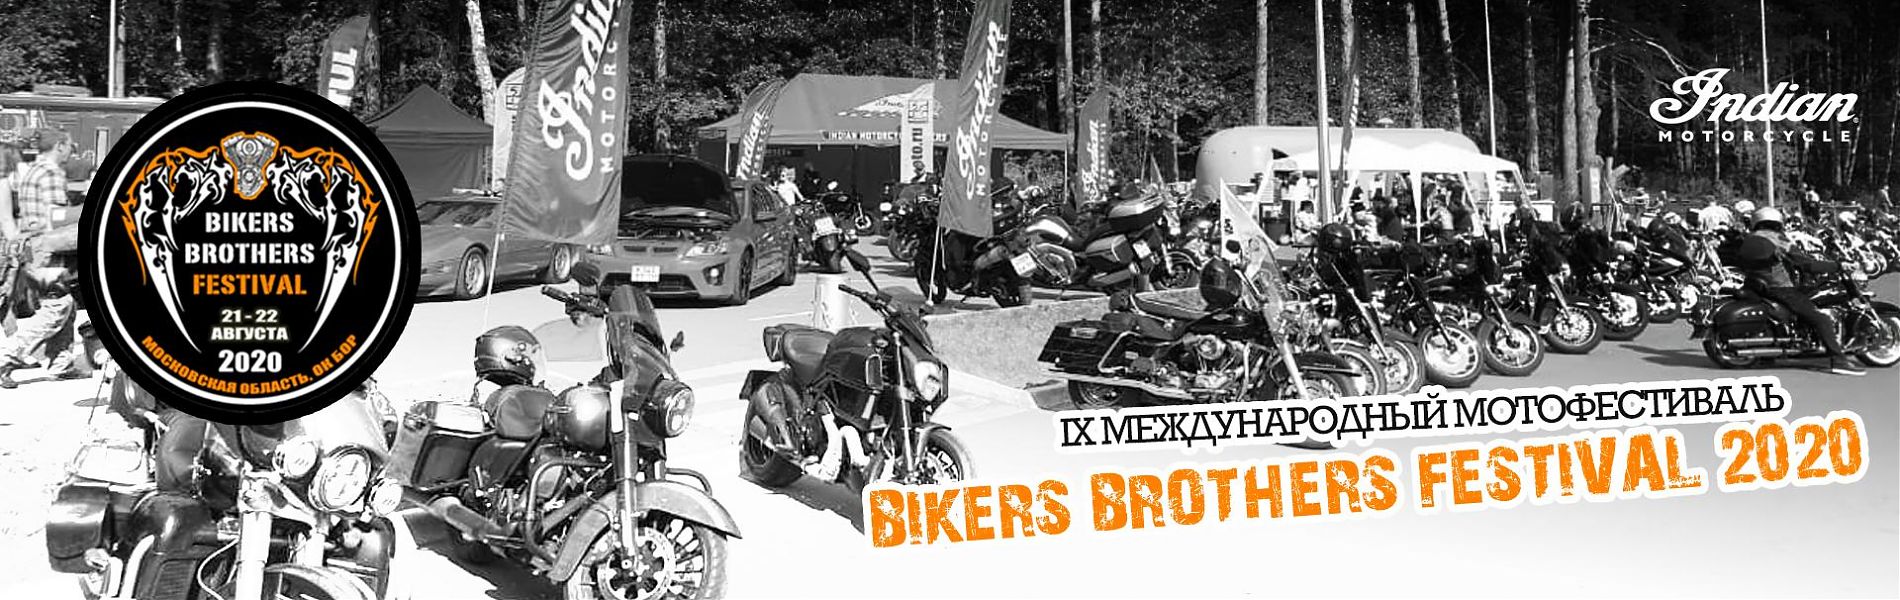 BIKERS BROTHERS FESTIVAL 2020